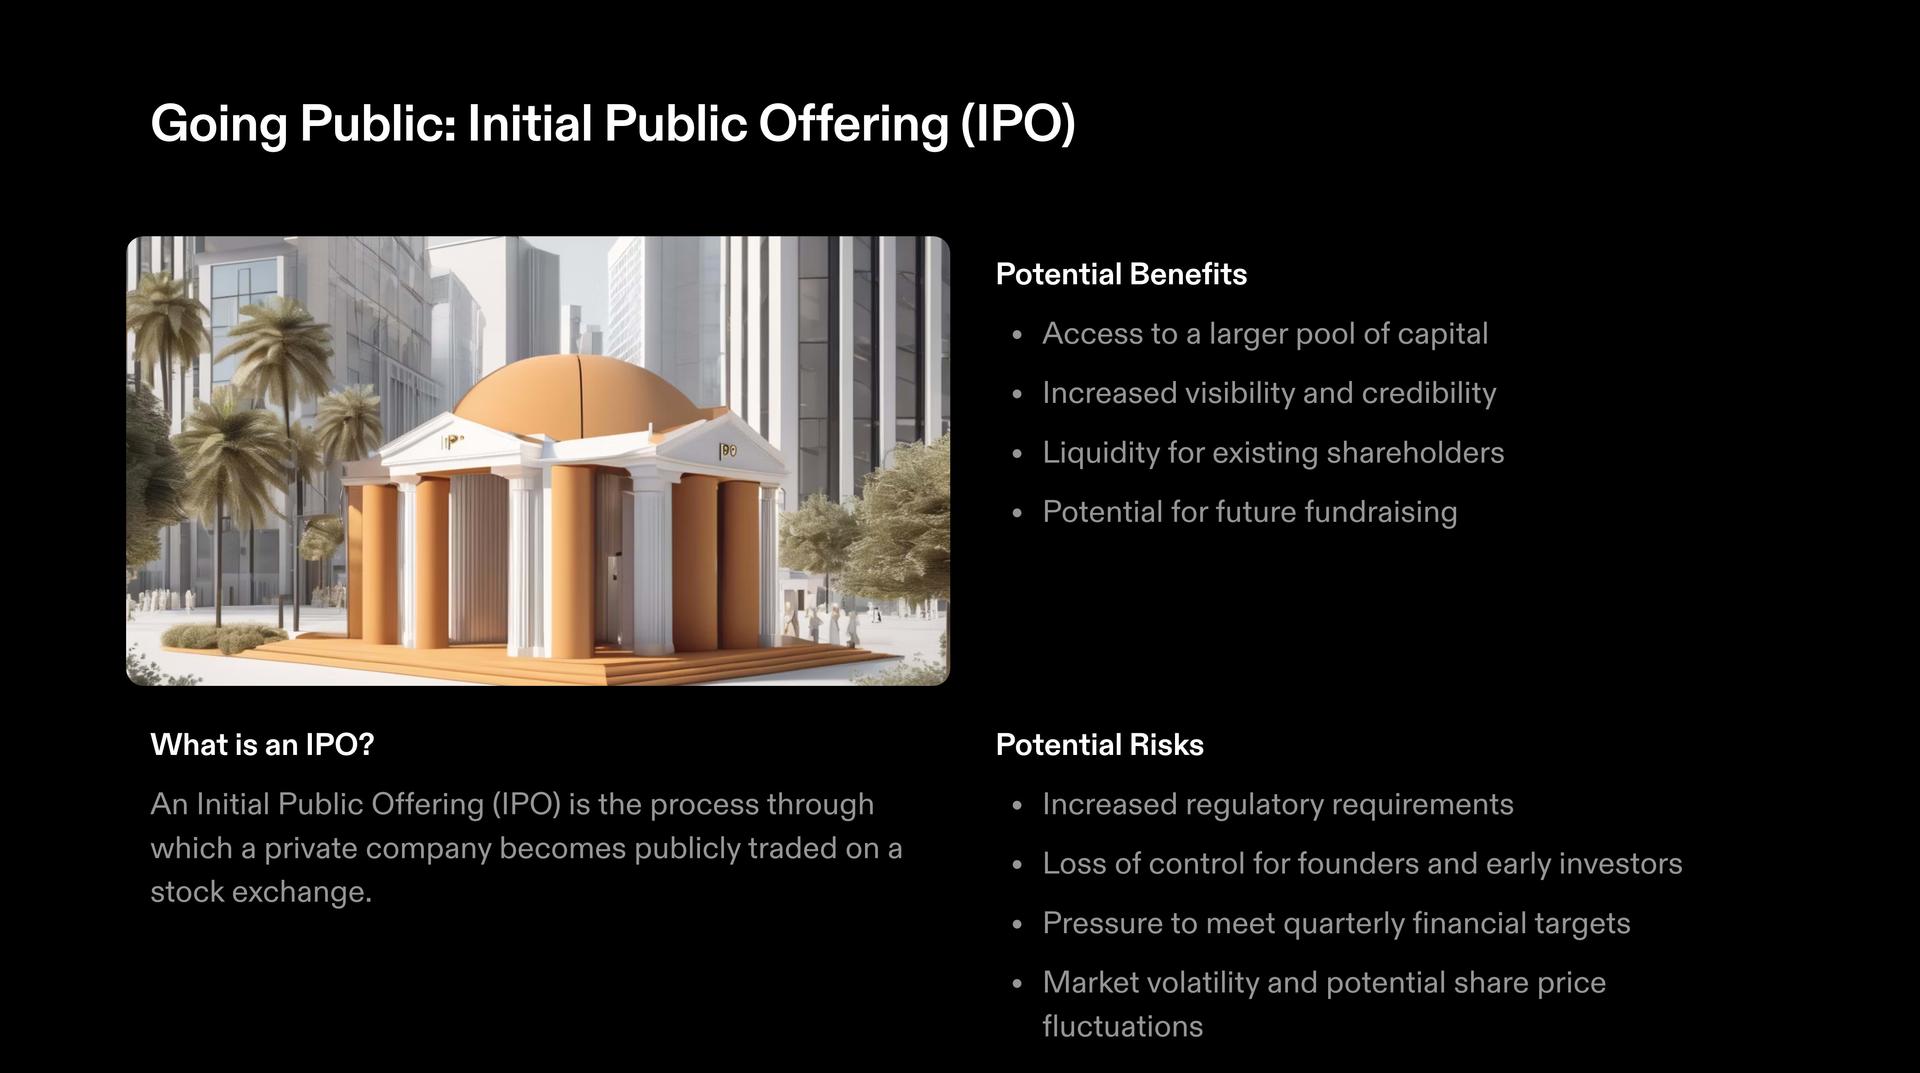 Image about Initial Public Offering (IPO)